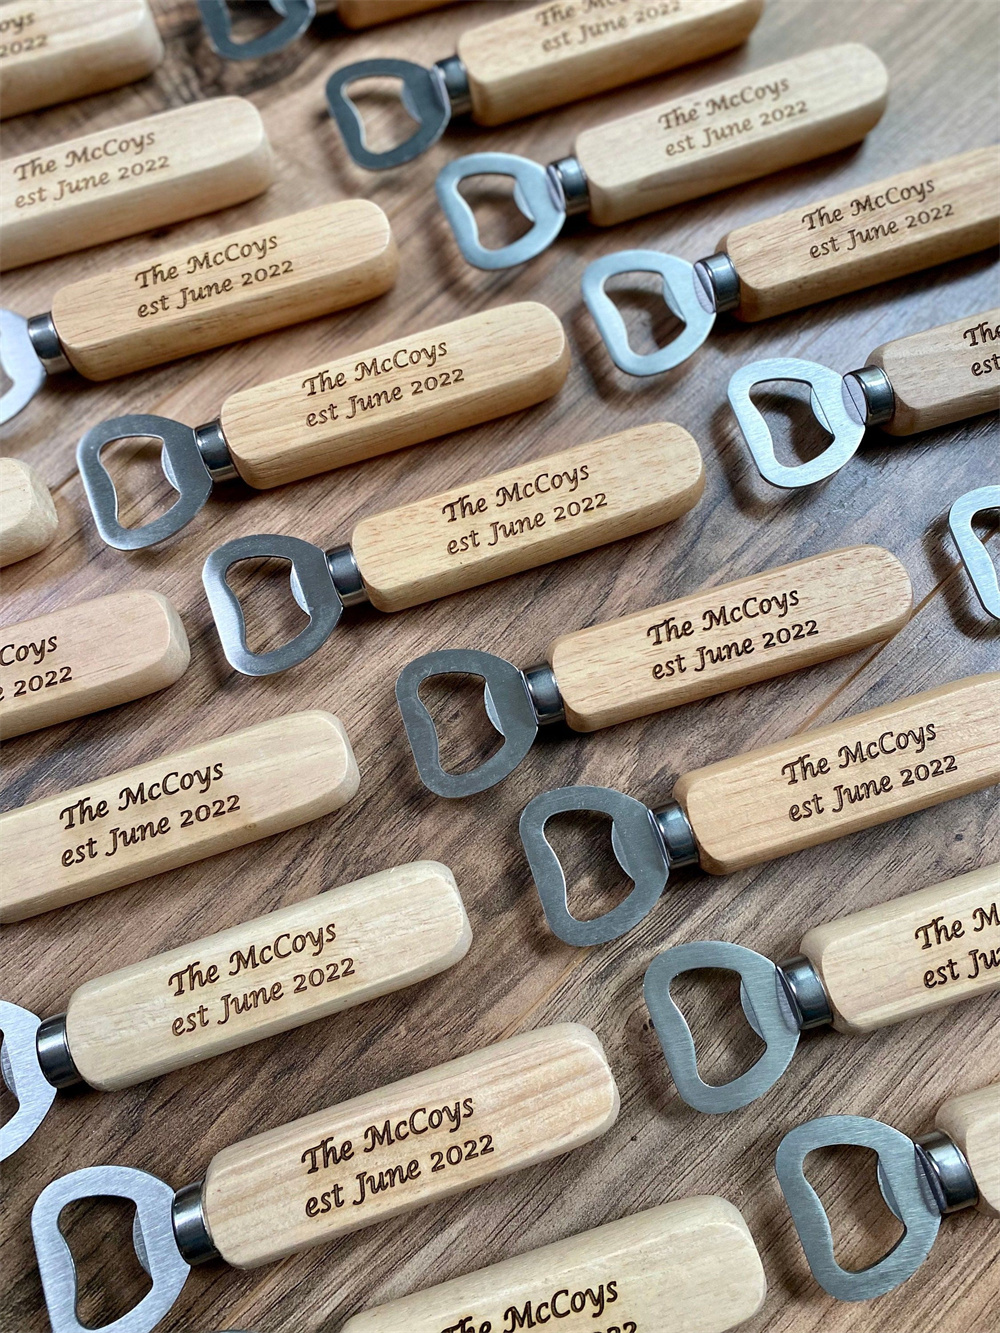 Fun and Creative Wedding Favors with Bottle Opener